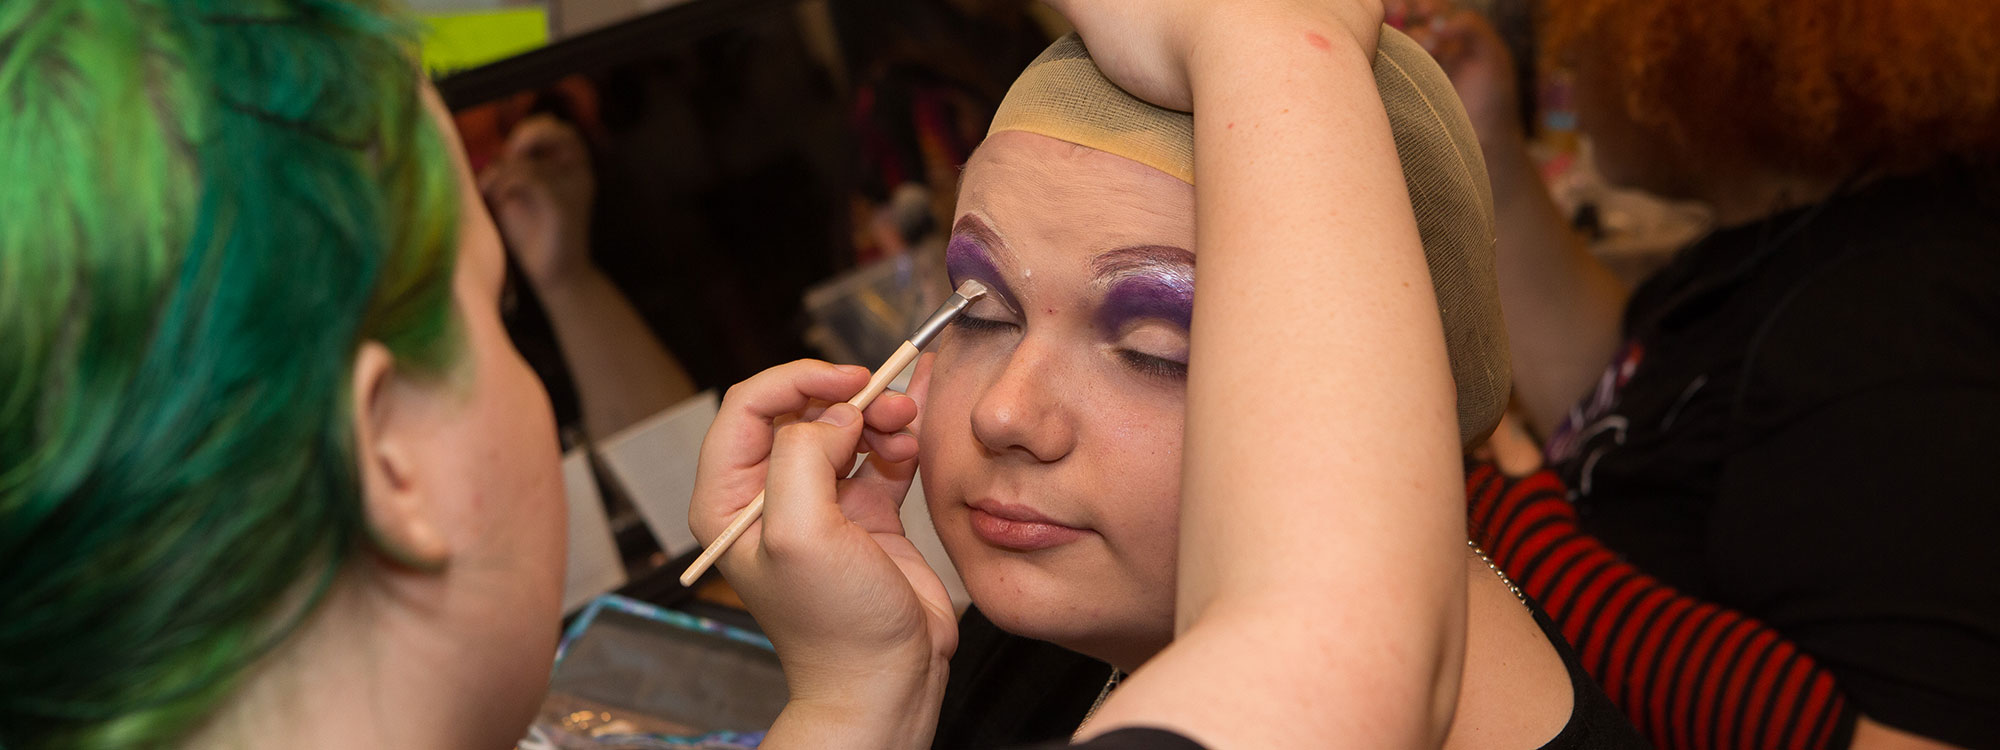 A teen having make-up applied to her face.